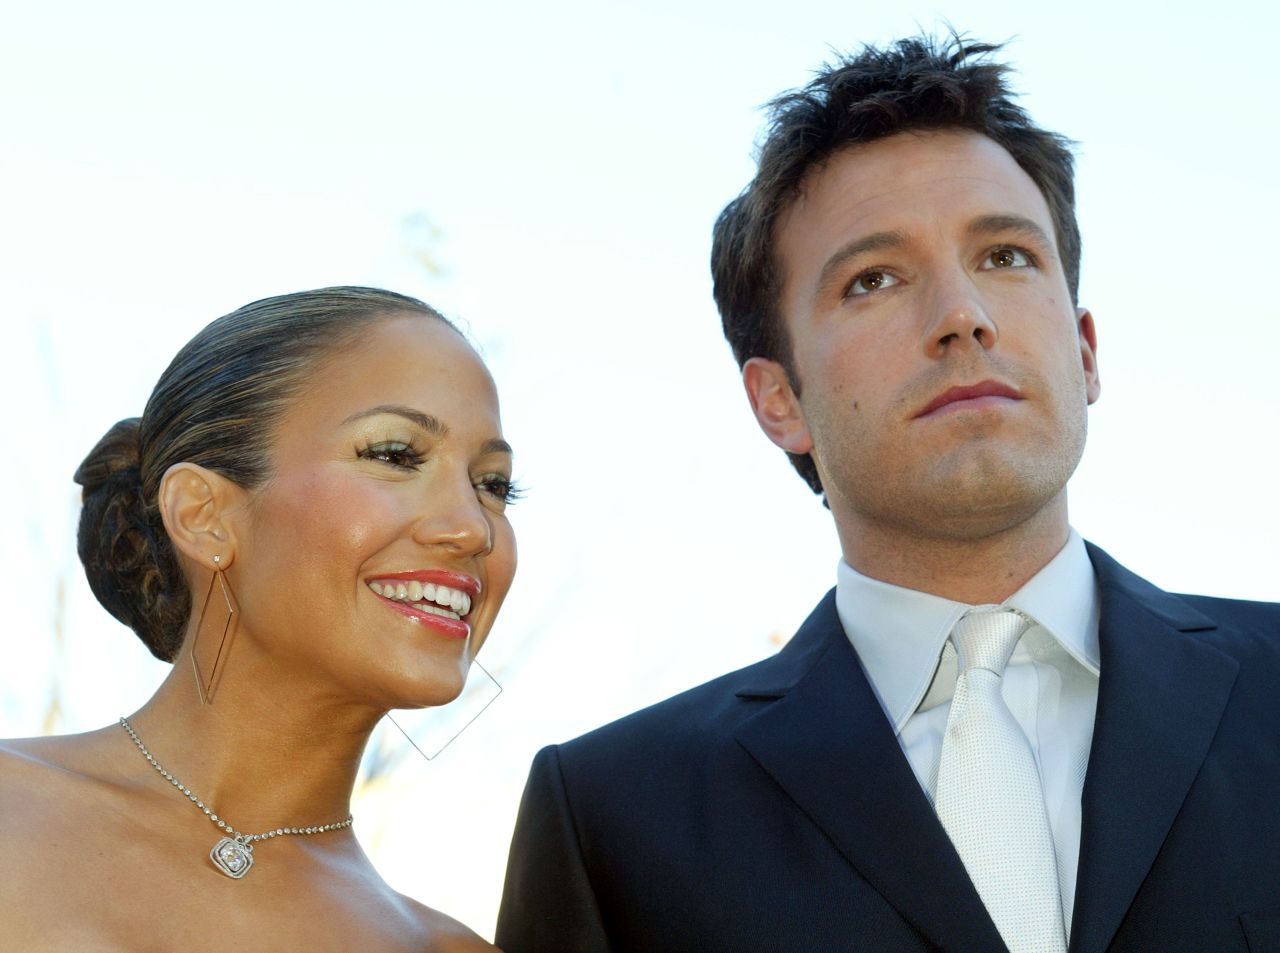 Jennifer Lopez and Affleck, dubbed "Bennifer," called off their engagement in 2004. By 2005, Affleck and Jennifer Garner were married, with a baby on the way.